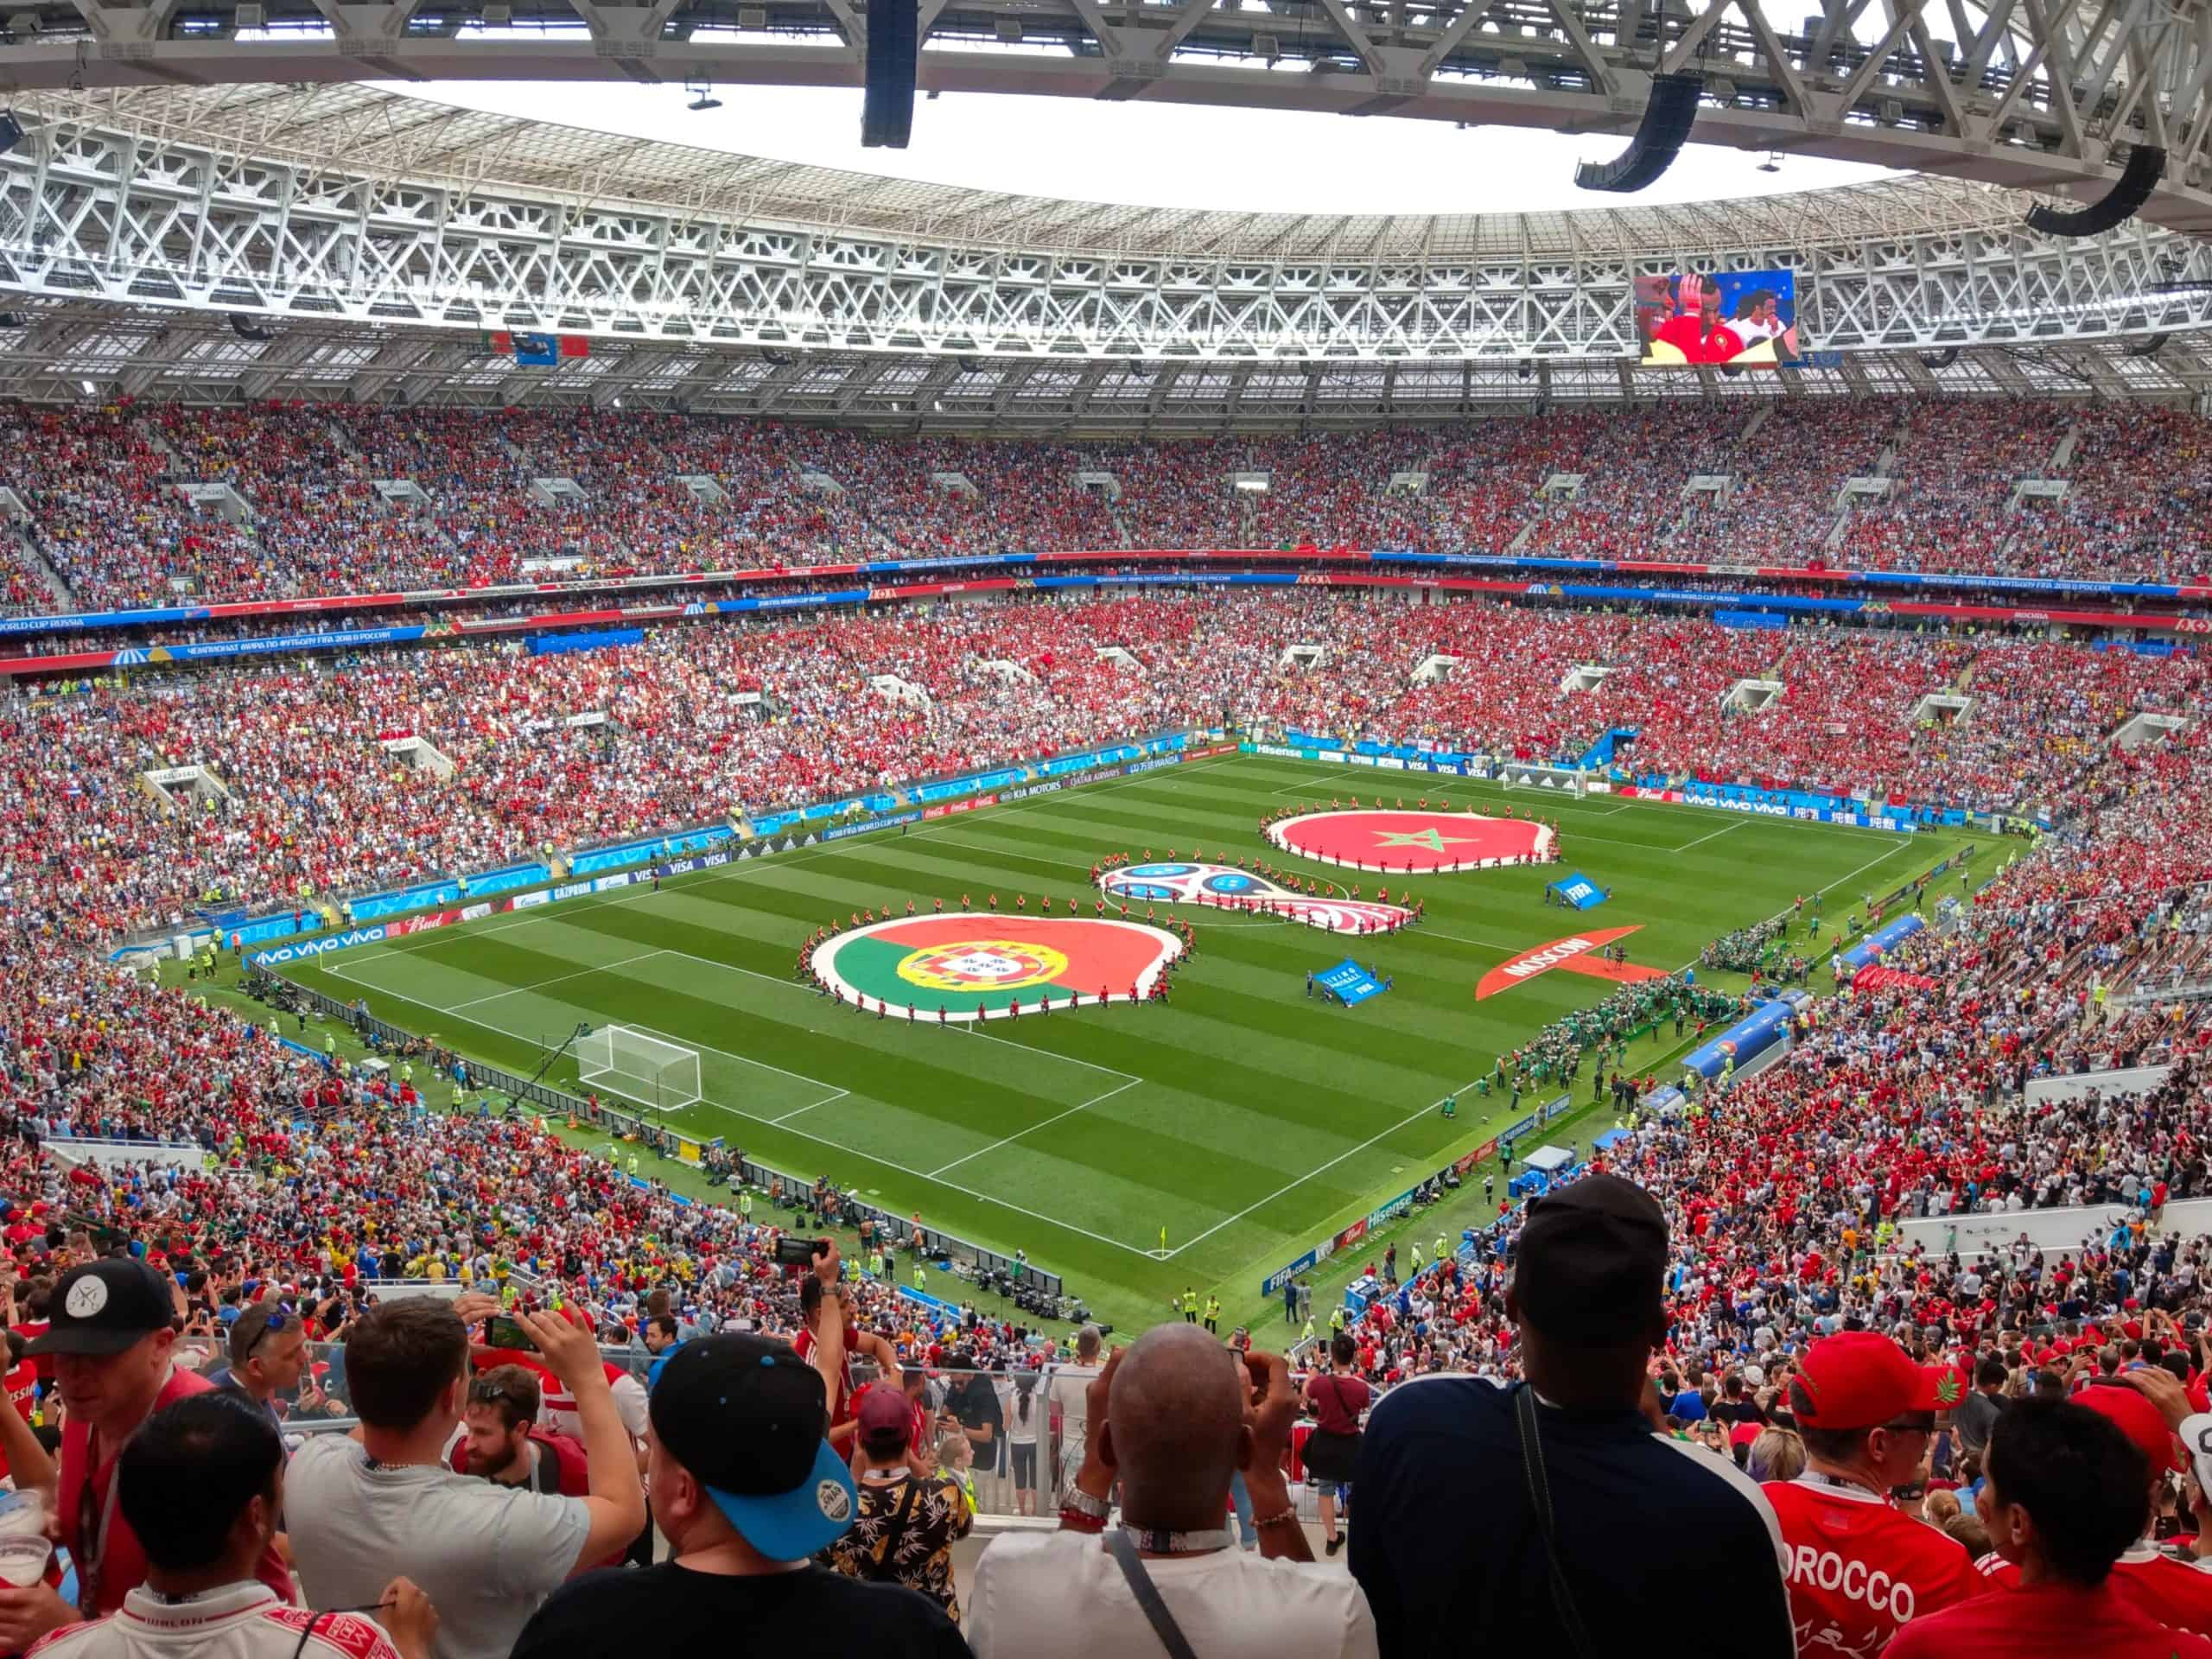 <p>Stadiums are large open structures with seating for spectators that host entertainment or sporting events. Stadiums are where supporters come together to show their support and celebrate with their favorite teams or individuals. It's an important part of sports culture. <strong>Let's discover the top 10 biggest stadiums across all of Europe, according to seating capacity.</strong></p><p>Remember to scroll up and hit the ‘Follow’ button to keep up with the newest stories from Seattle Travel on your Microsoft Start feed or MSN homepage!</p>